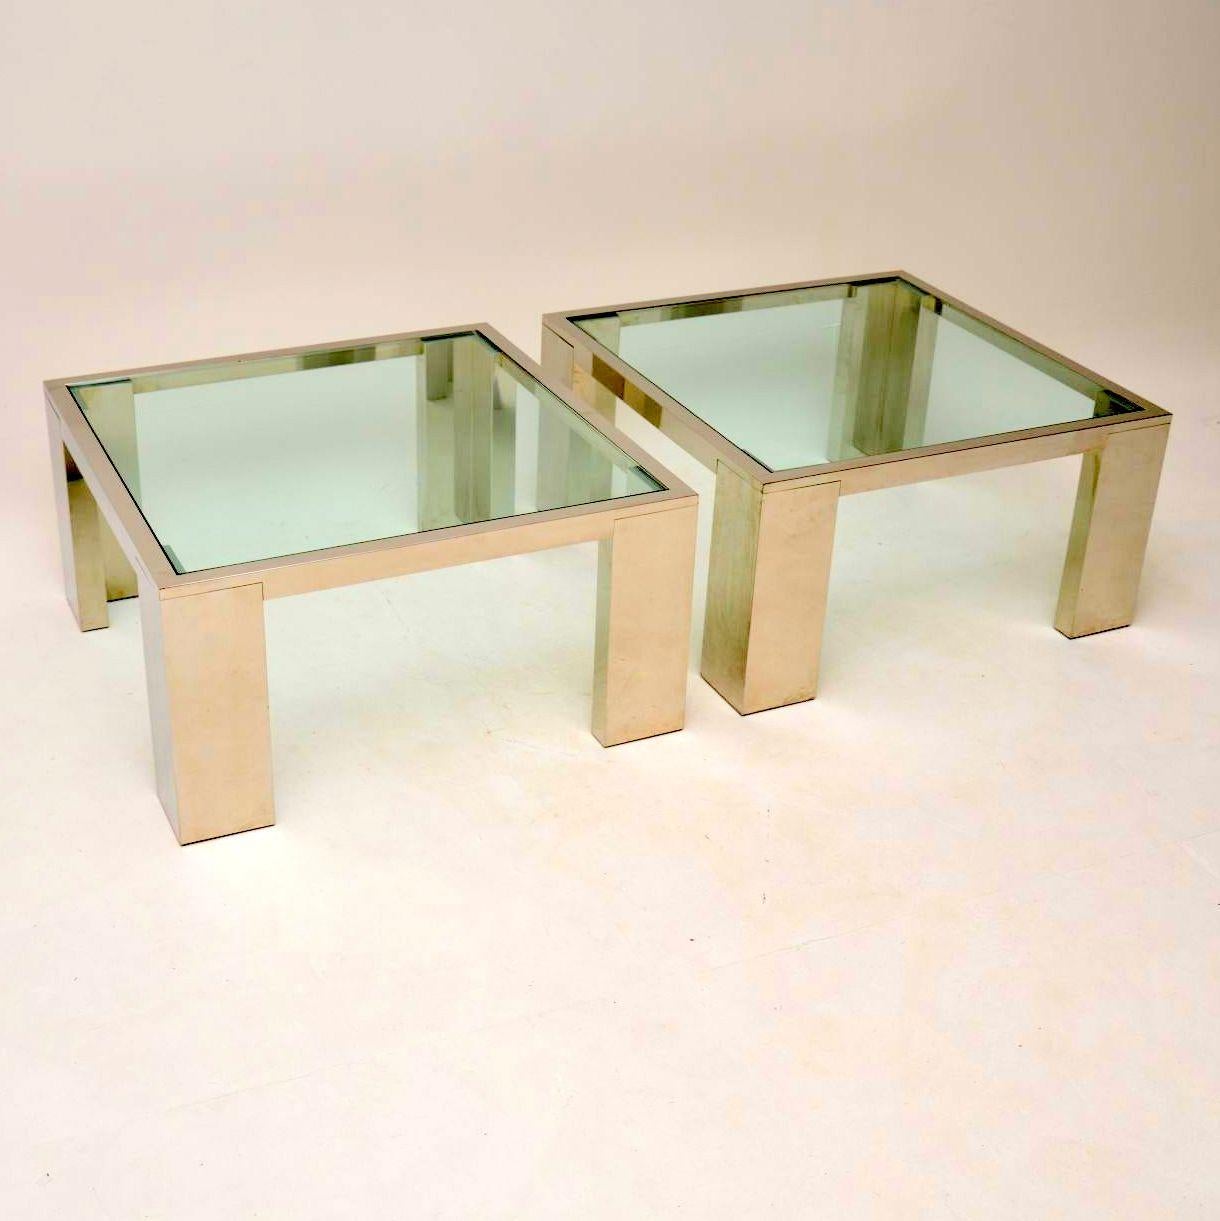 A superb pair of low vintage tables, these are of outstanding quality, with thick chromed steel frames, and extremely thick glass tops. These date from around the 1970s, and they are in great condition for their age, with just some minor surface